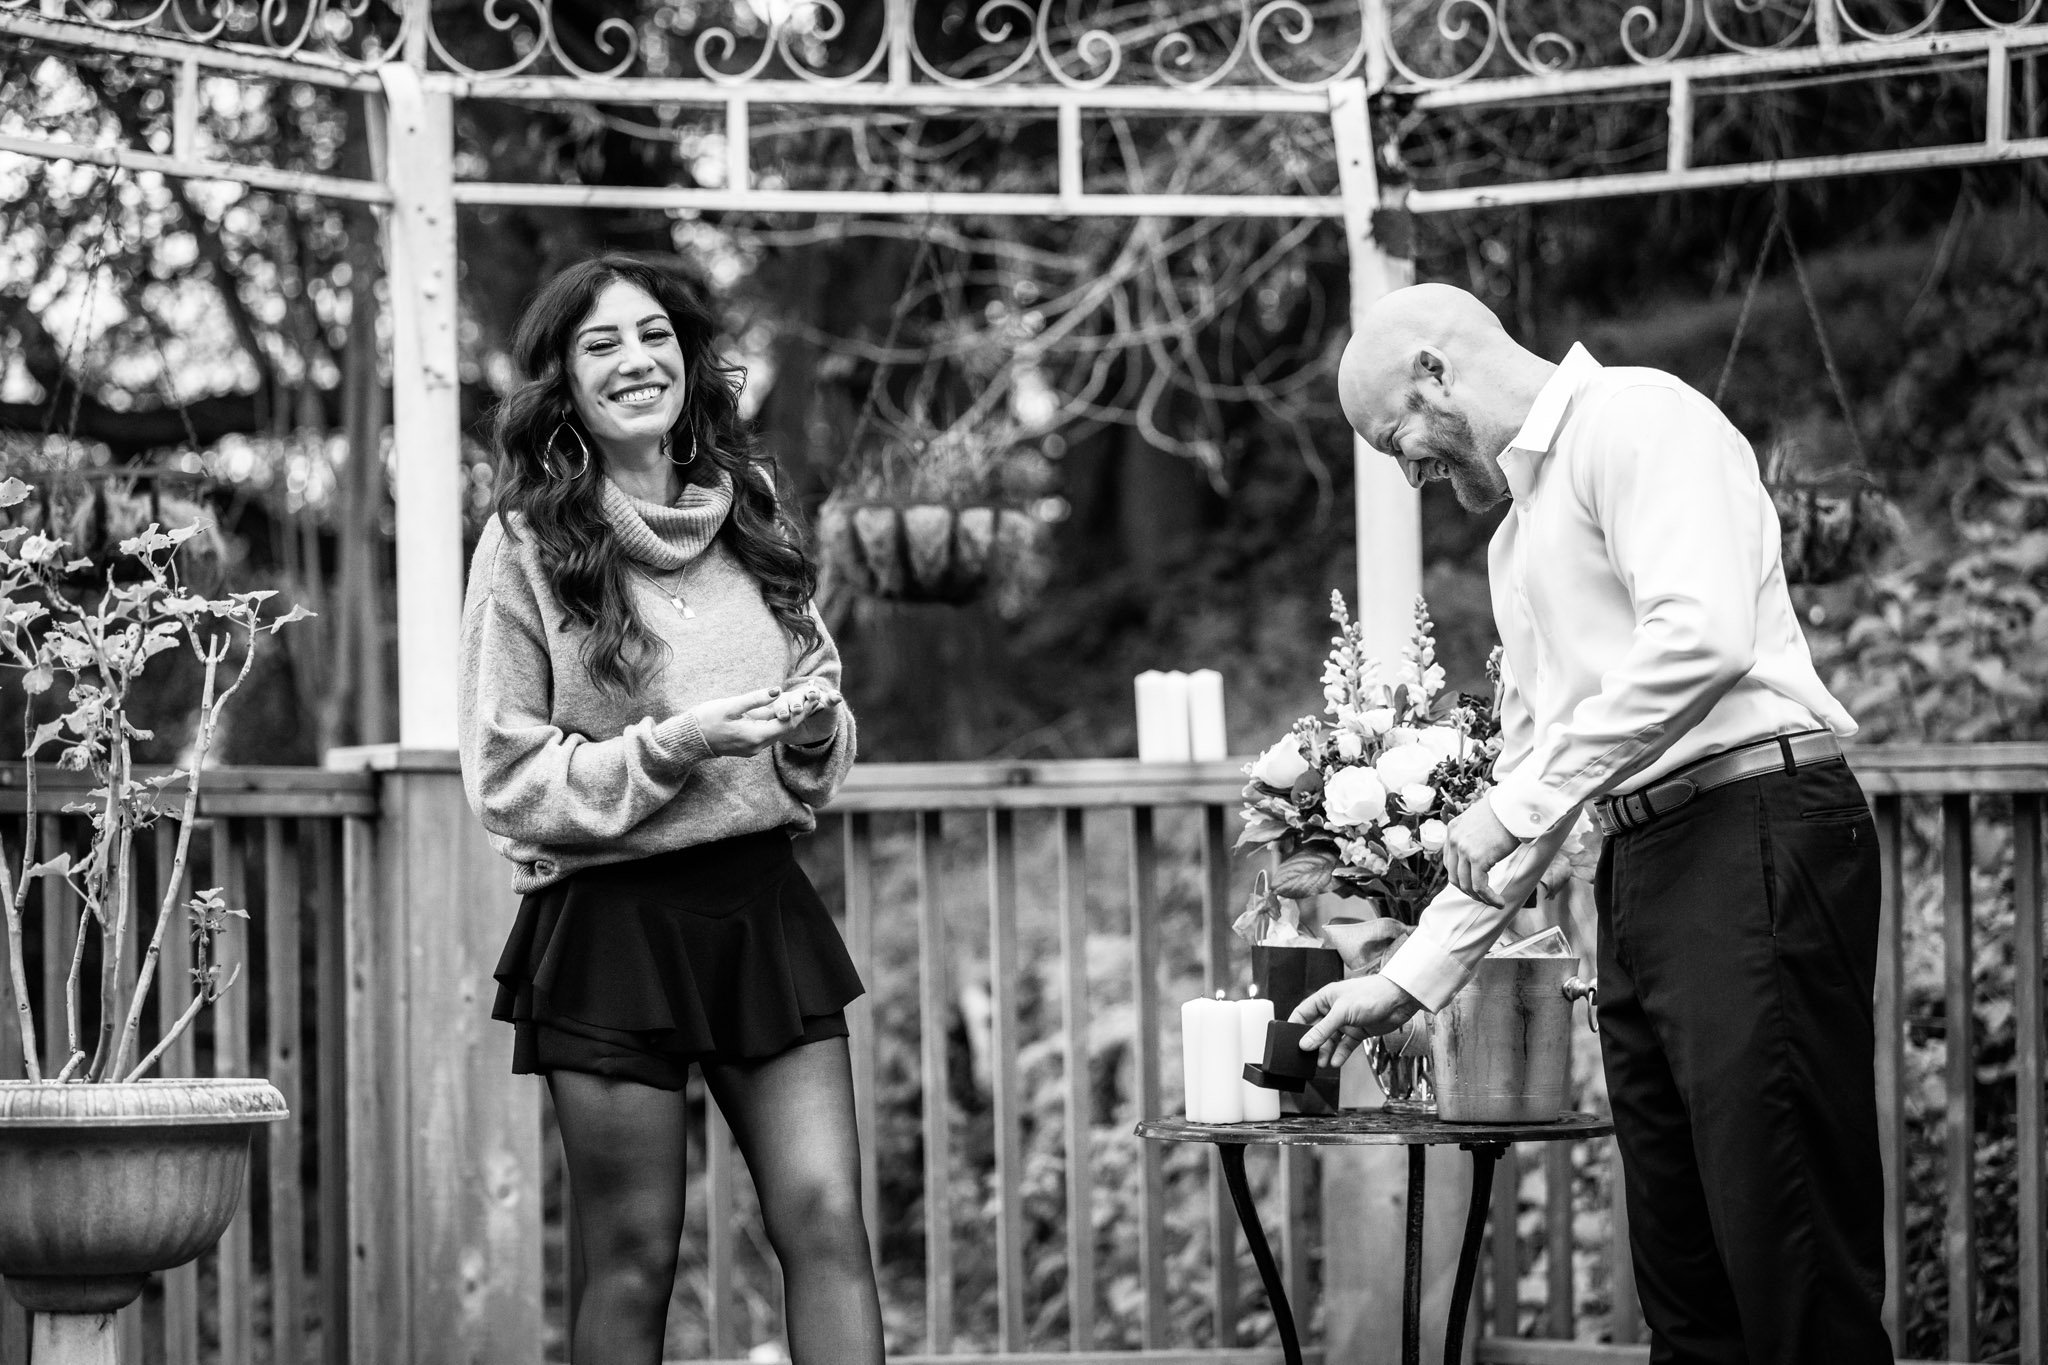 Z9A_3460_Victor_and_Colie_Santa_Cruz_Marriage_Proposal_Photography.jpg